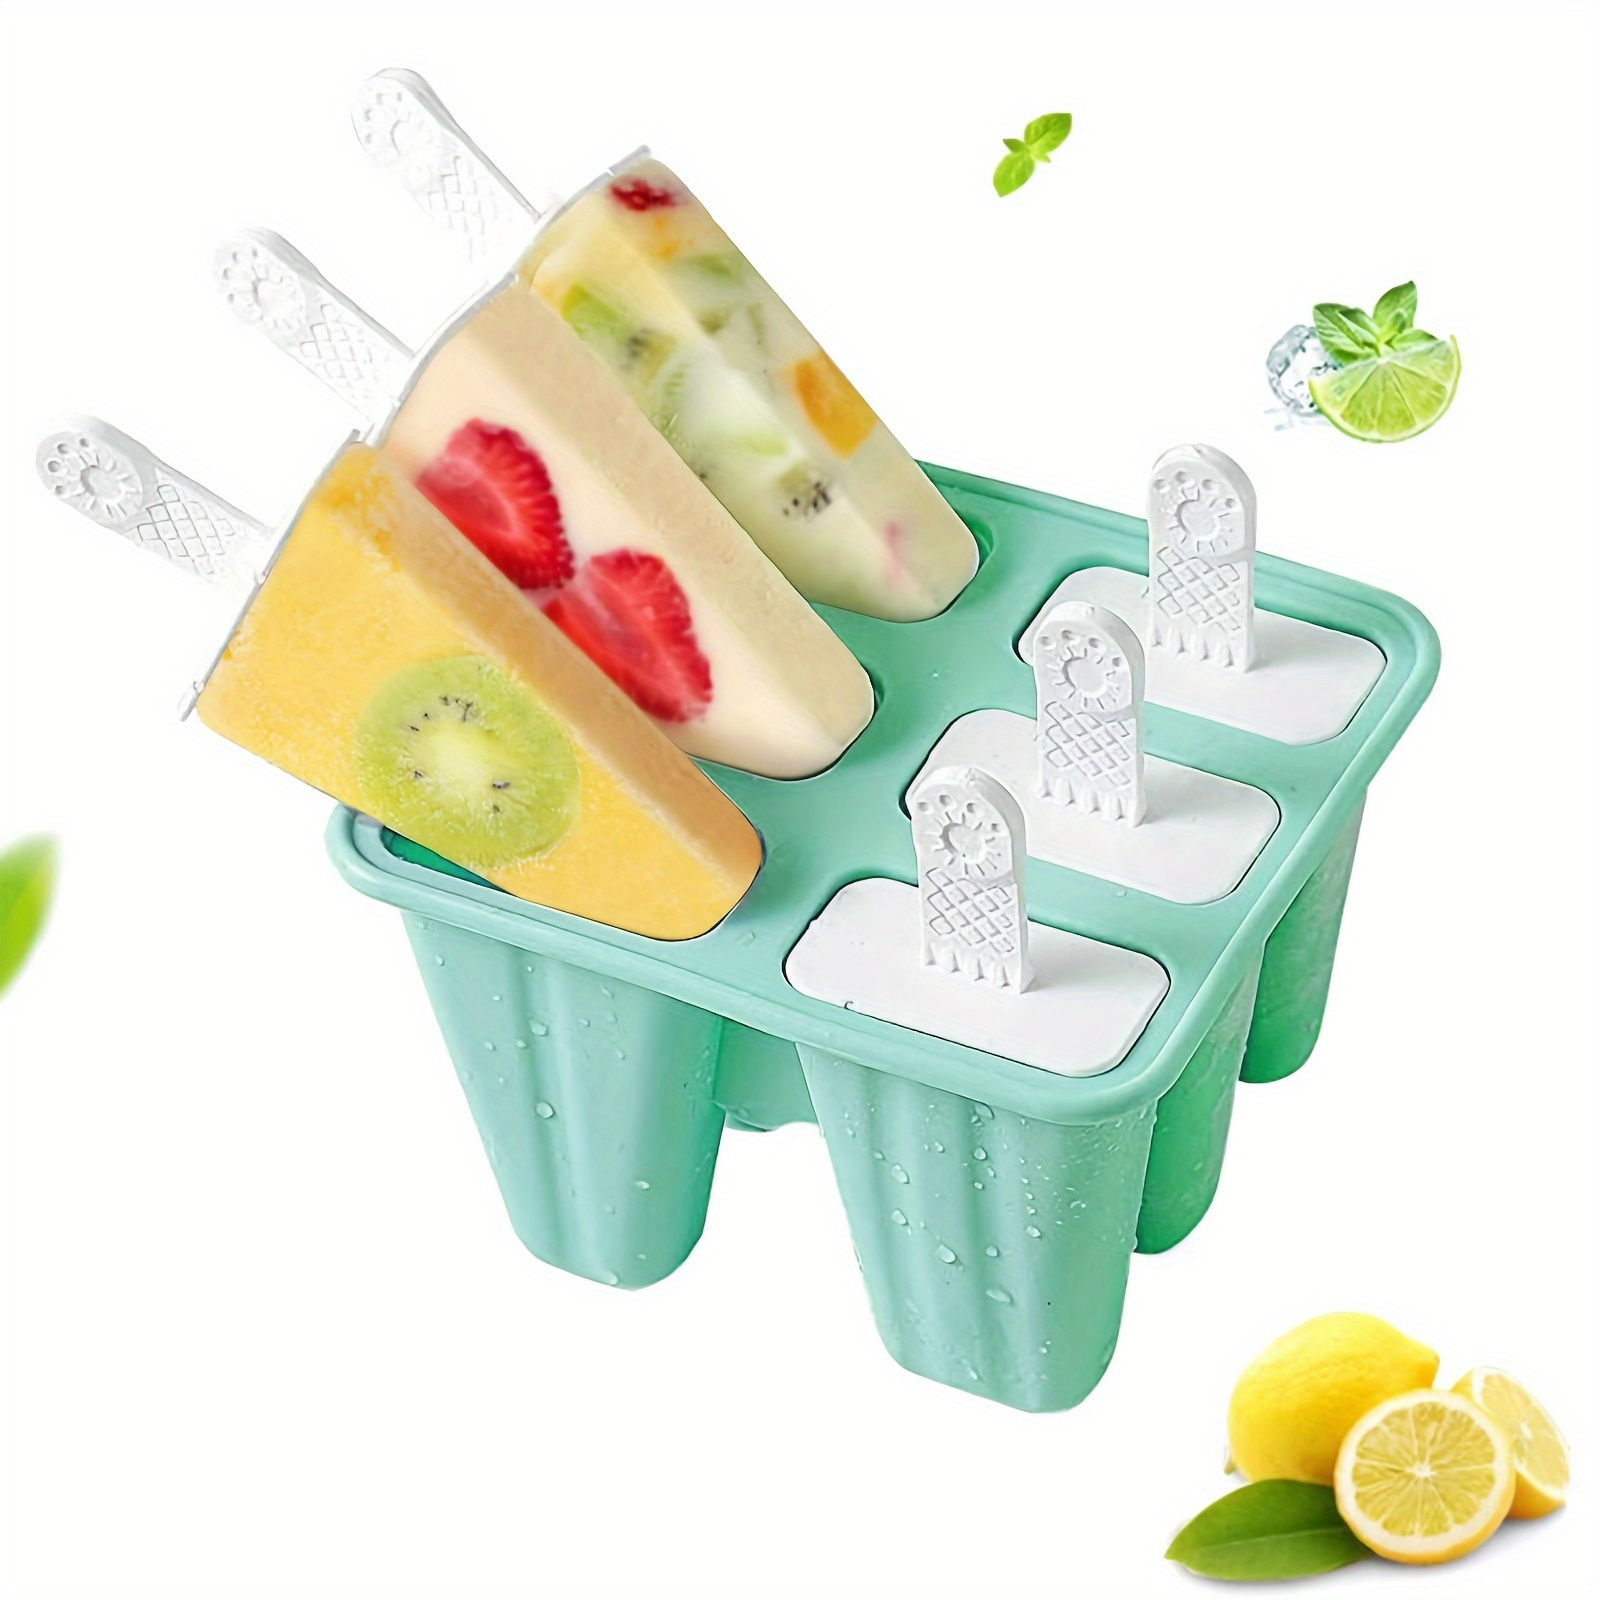 

1pc Popsicles Molds, 6 Cavities Bpa Free Silicone Popsicle Molds, Reusable Popsicle Mold, Ice Pop Molds, Silicone Popsicle Maker, Homemade Ice Cream Mold, Home Supplies